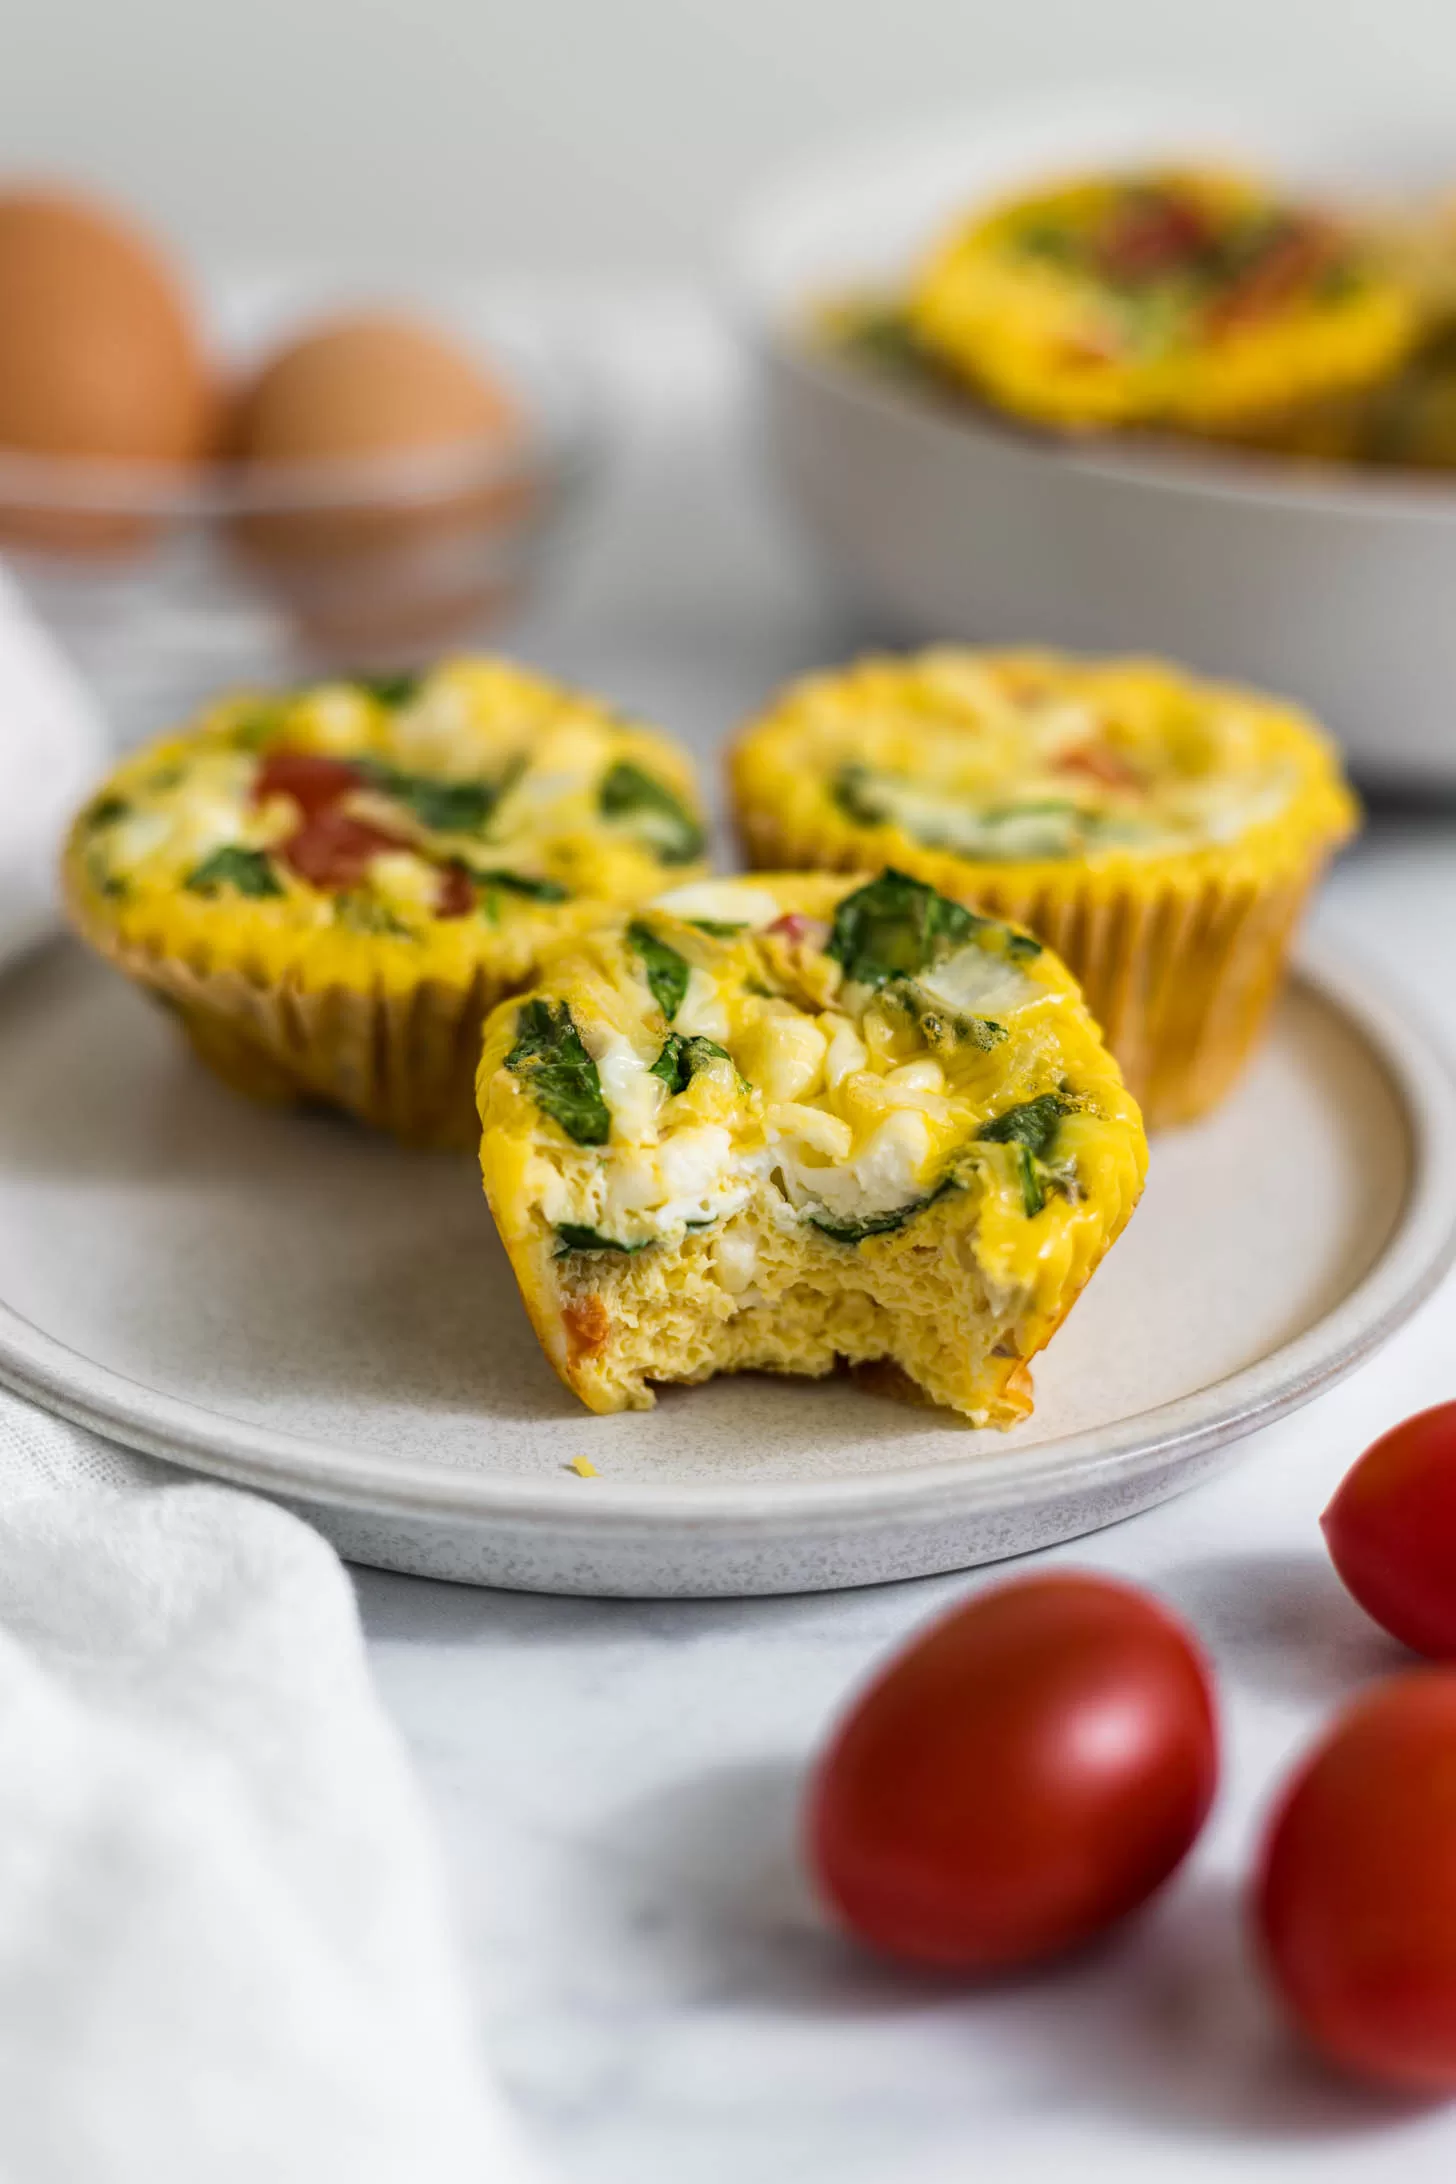 Plate of egg muffins, one with a bite out of it.